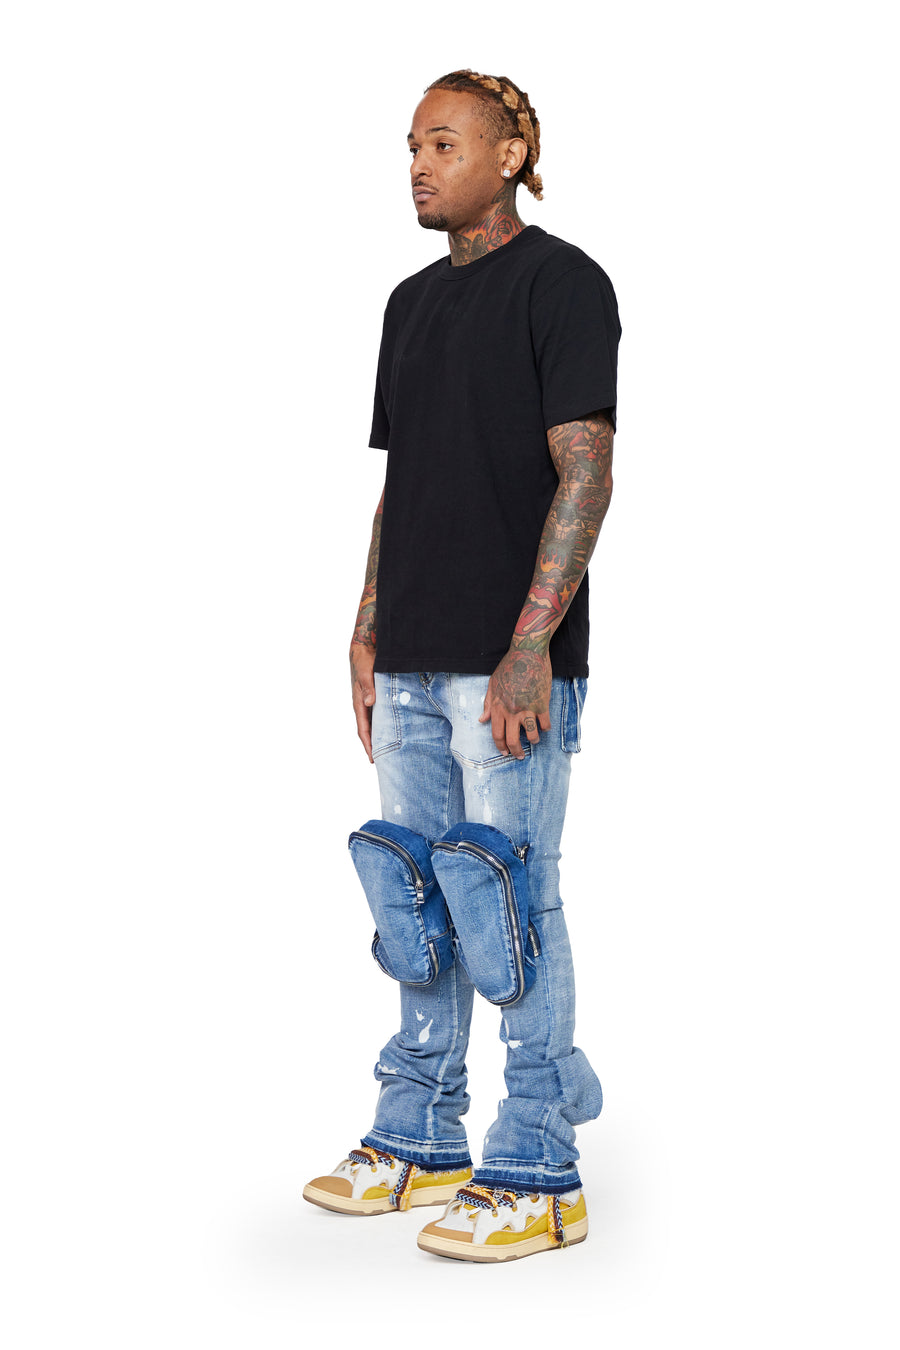 “LEOPOLD” BLUE WASHED STACKED FLARE JEAN